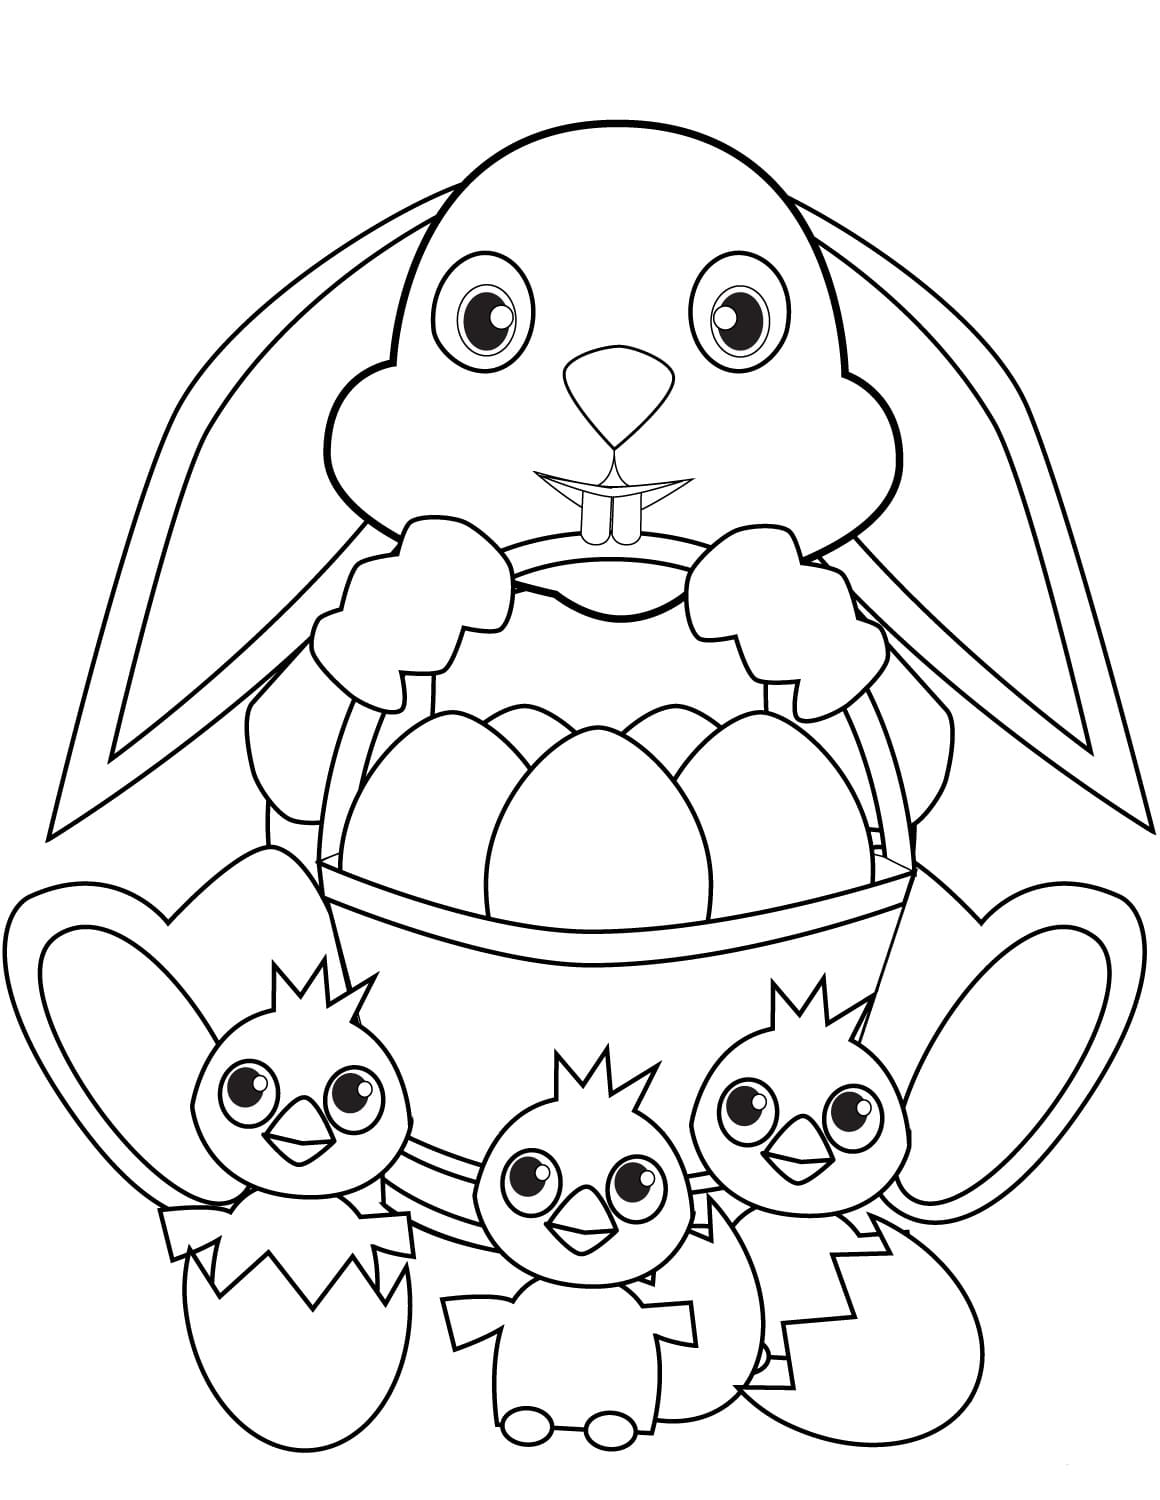 Easter Coloring Pages | 70 images Free Printable